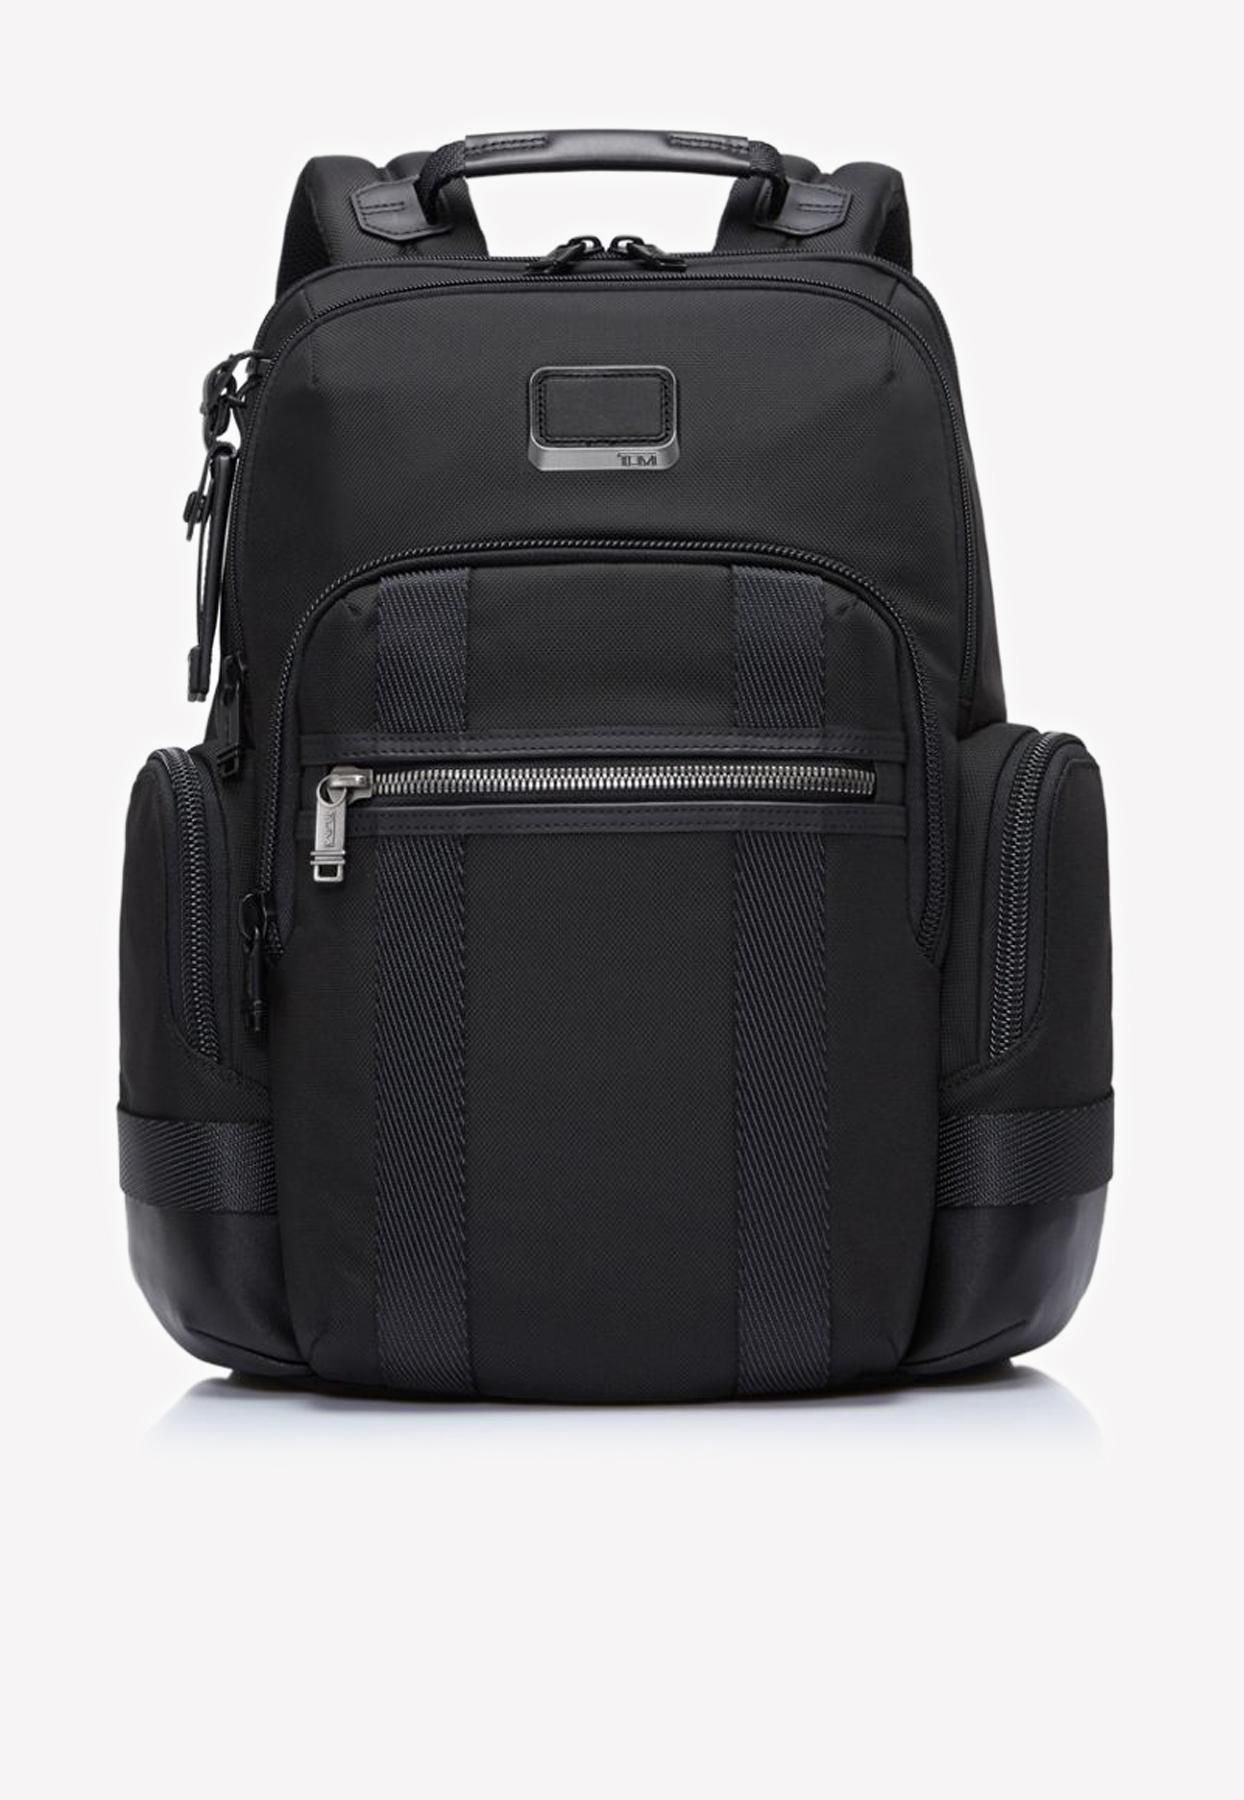 Tumi Synthetic Alpha Bravo Norman Backpack in Black for Men - Lyst